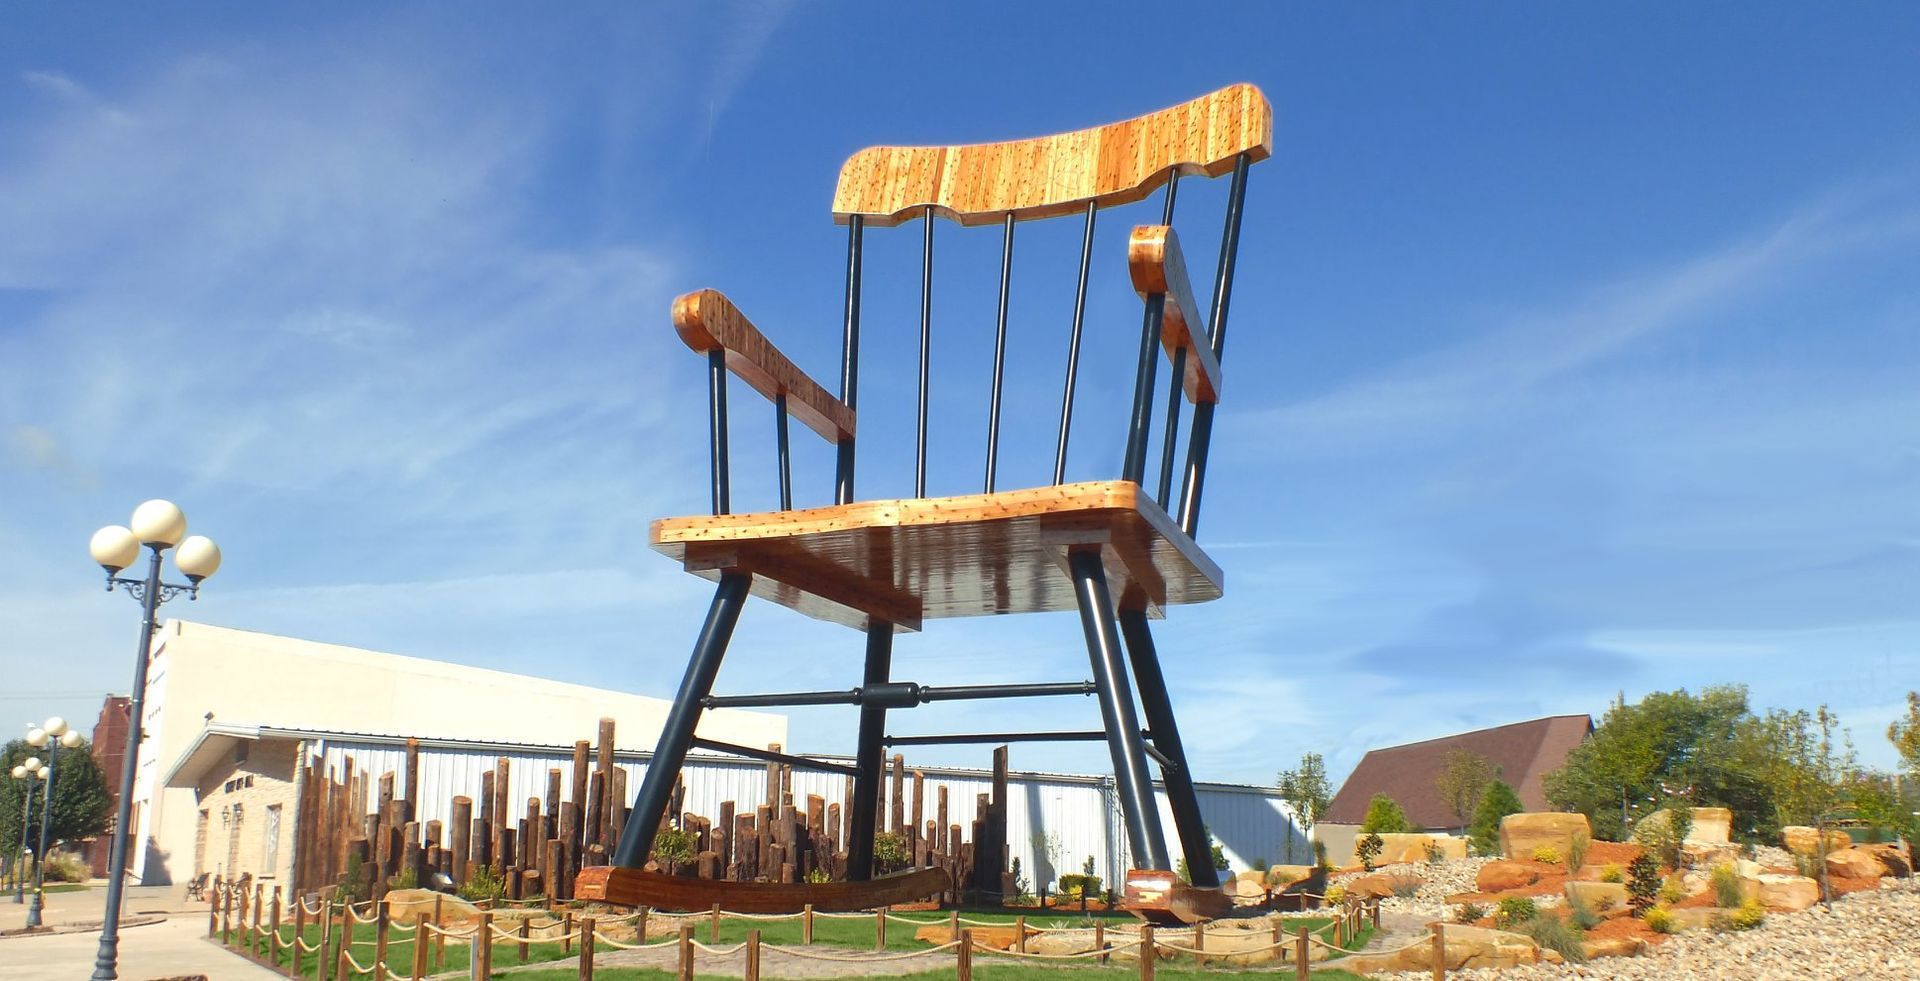 
World's Largest Rocking Chair, world record in Casey, Illinois